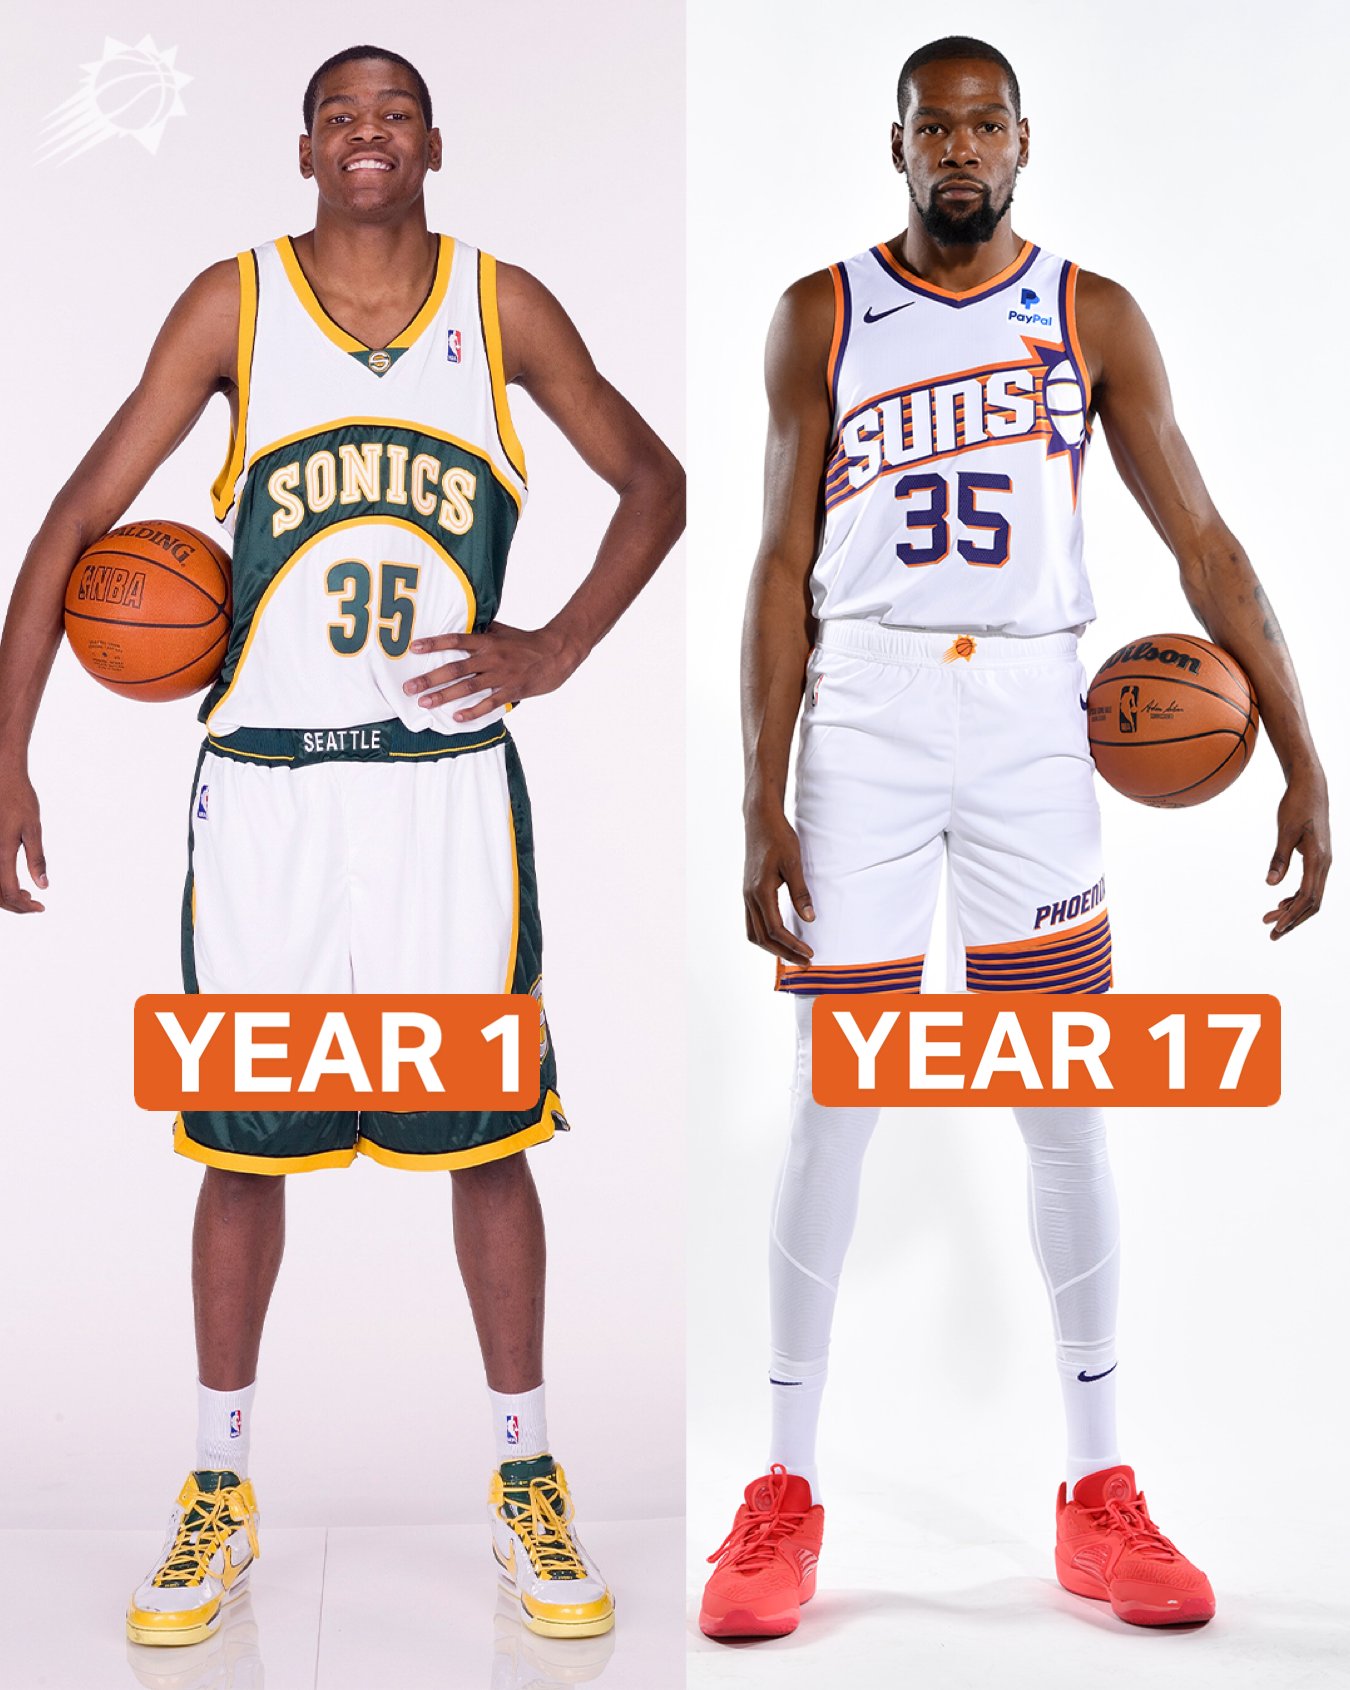 Kevin Durant at his year 1 media day side-by-side his media day picture for year 17.